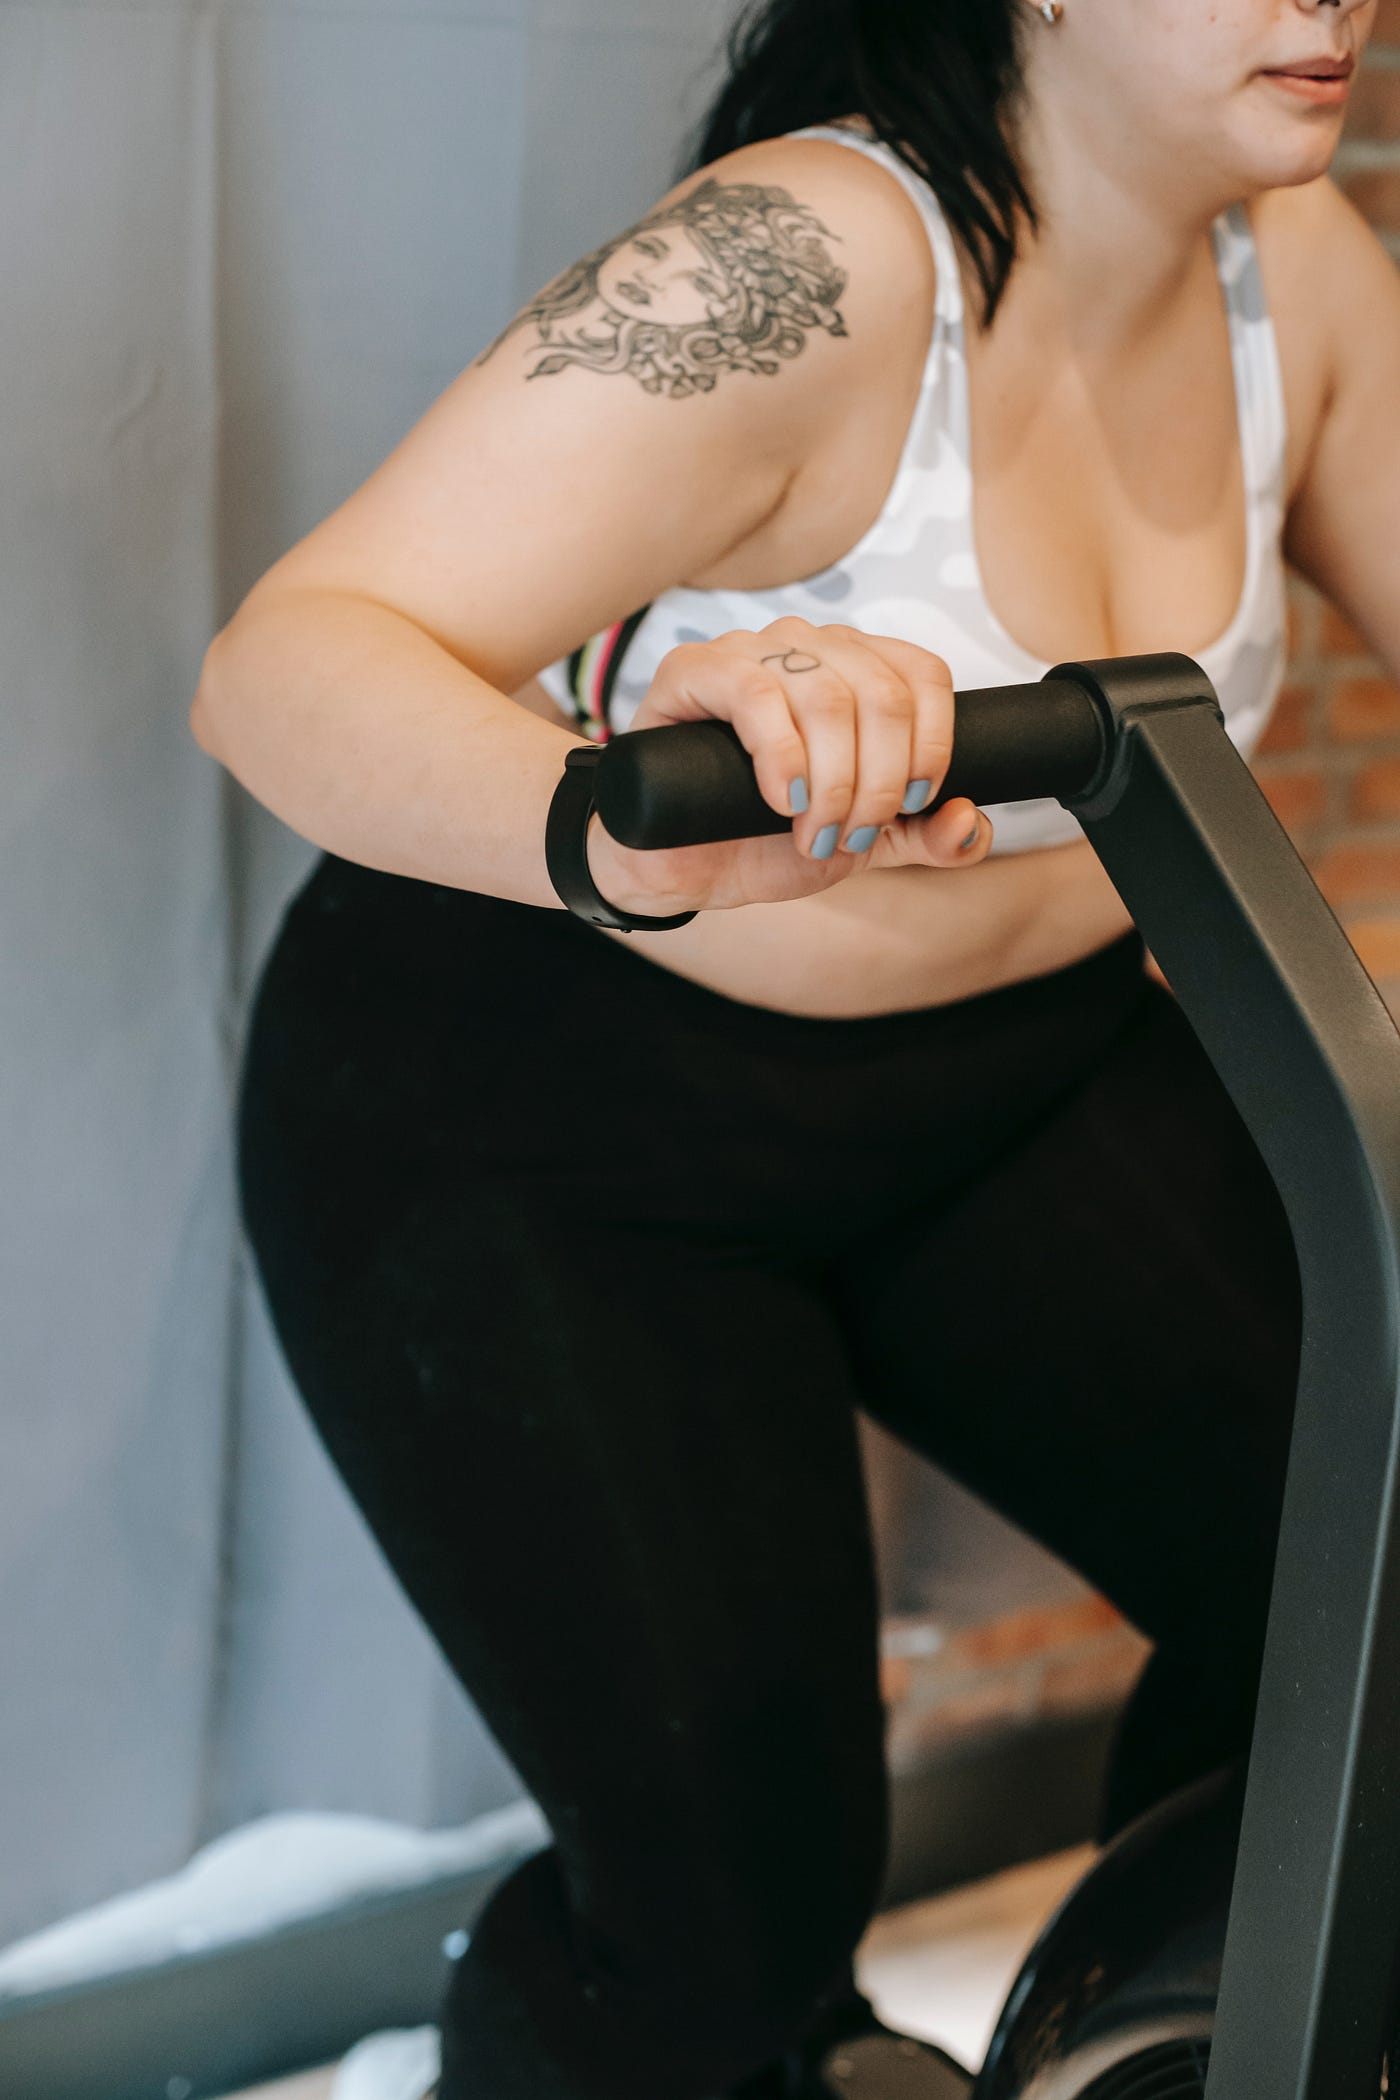 The 10 Essentials That Give me Confidence at the Gym as an Overweight Girl, by Zara Austin, ILLUMINATION